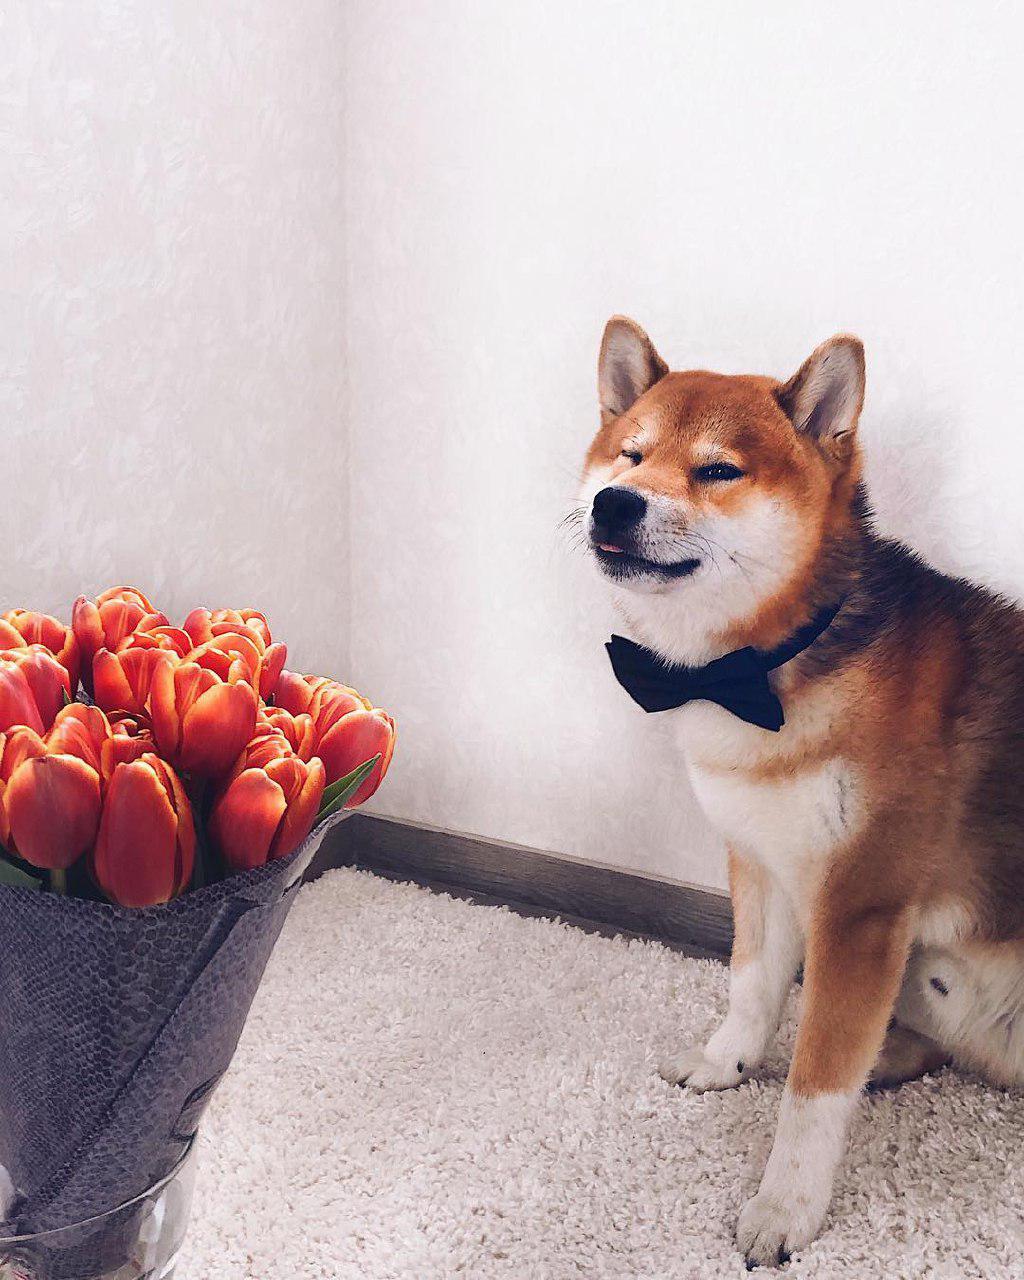 A Shiba Inu wearing a bow tie while sitting on the floor in front of a bouquet of tulip flowers